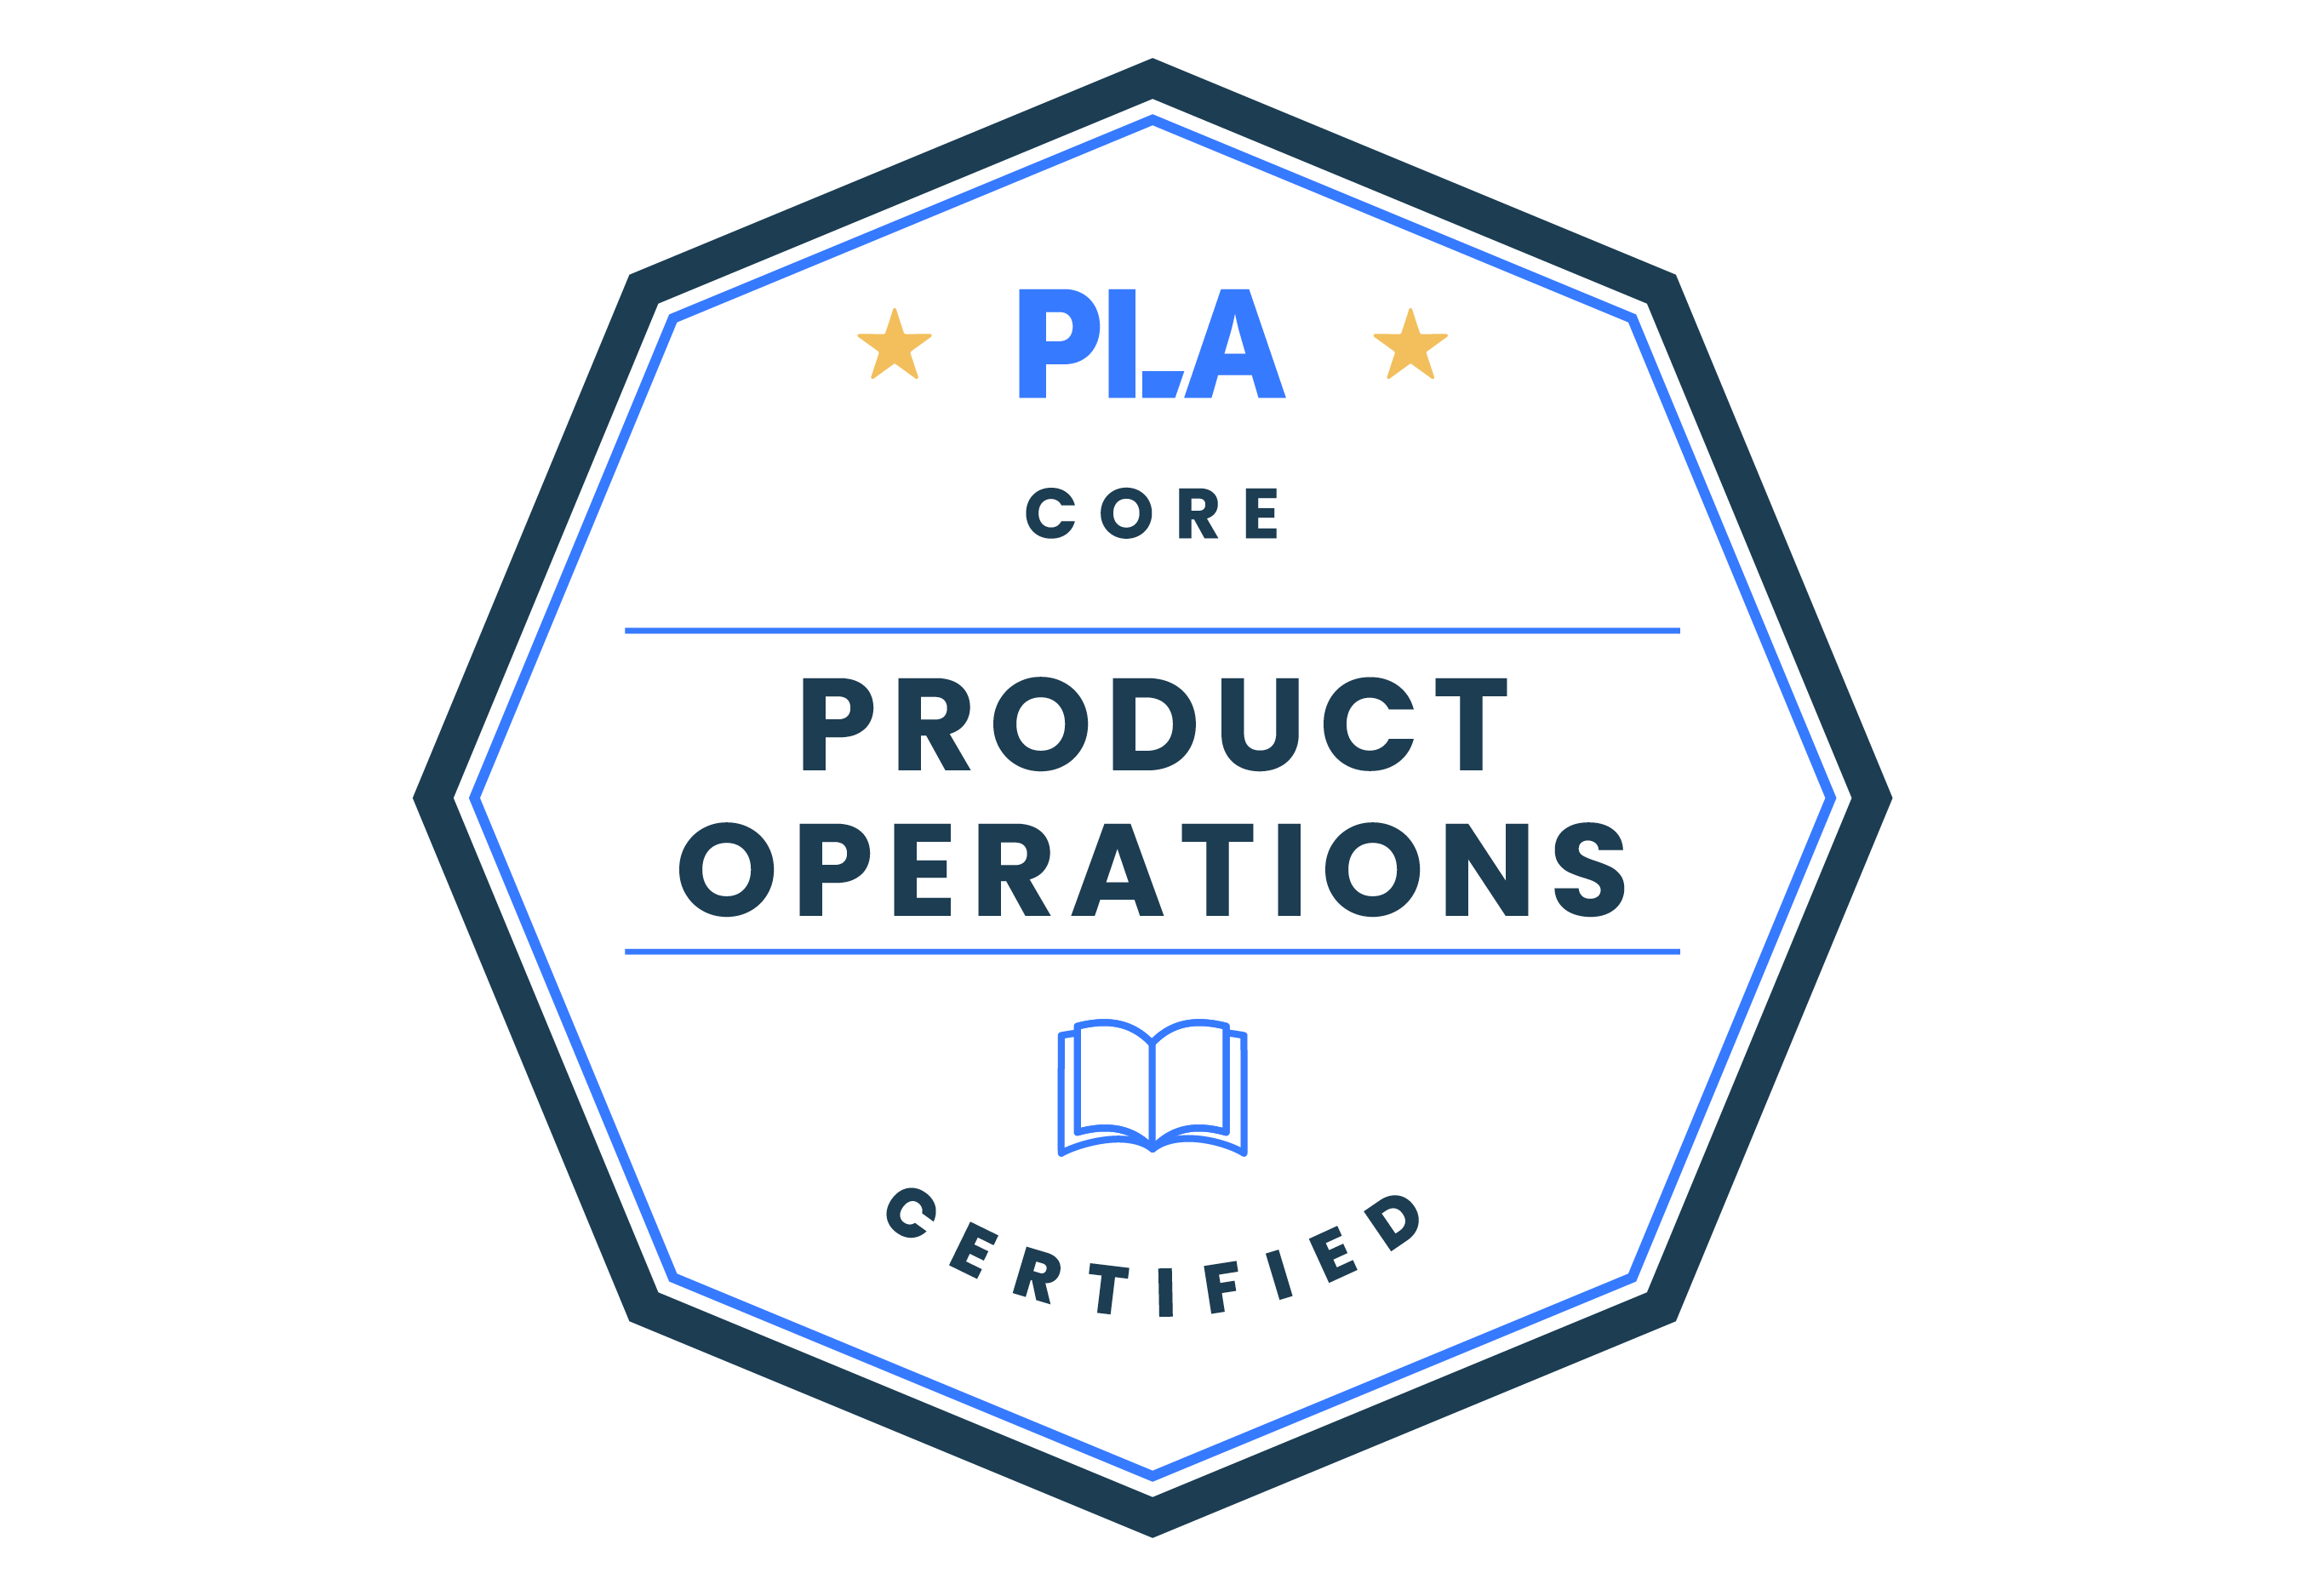 Product Operations Certified: Core badge